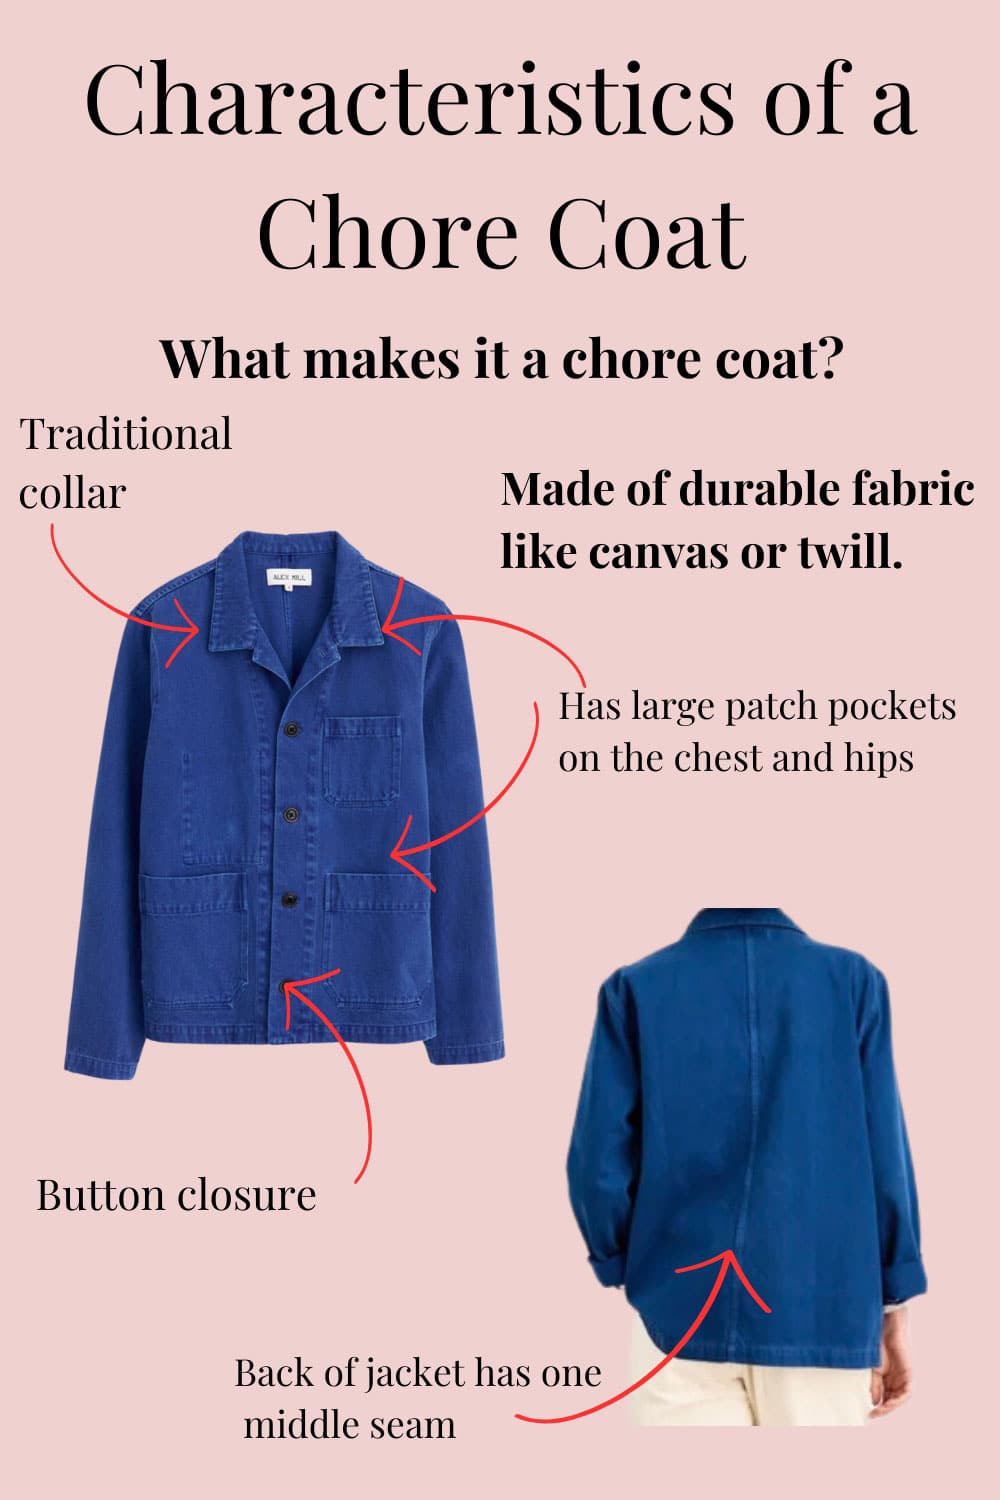 Chore Coat With Corduroy Collar Jacket - Red